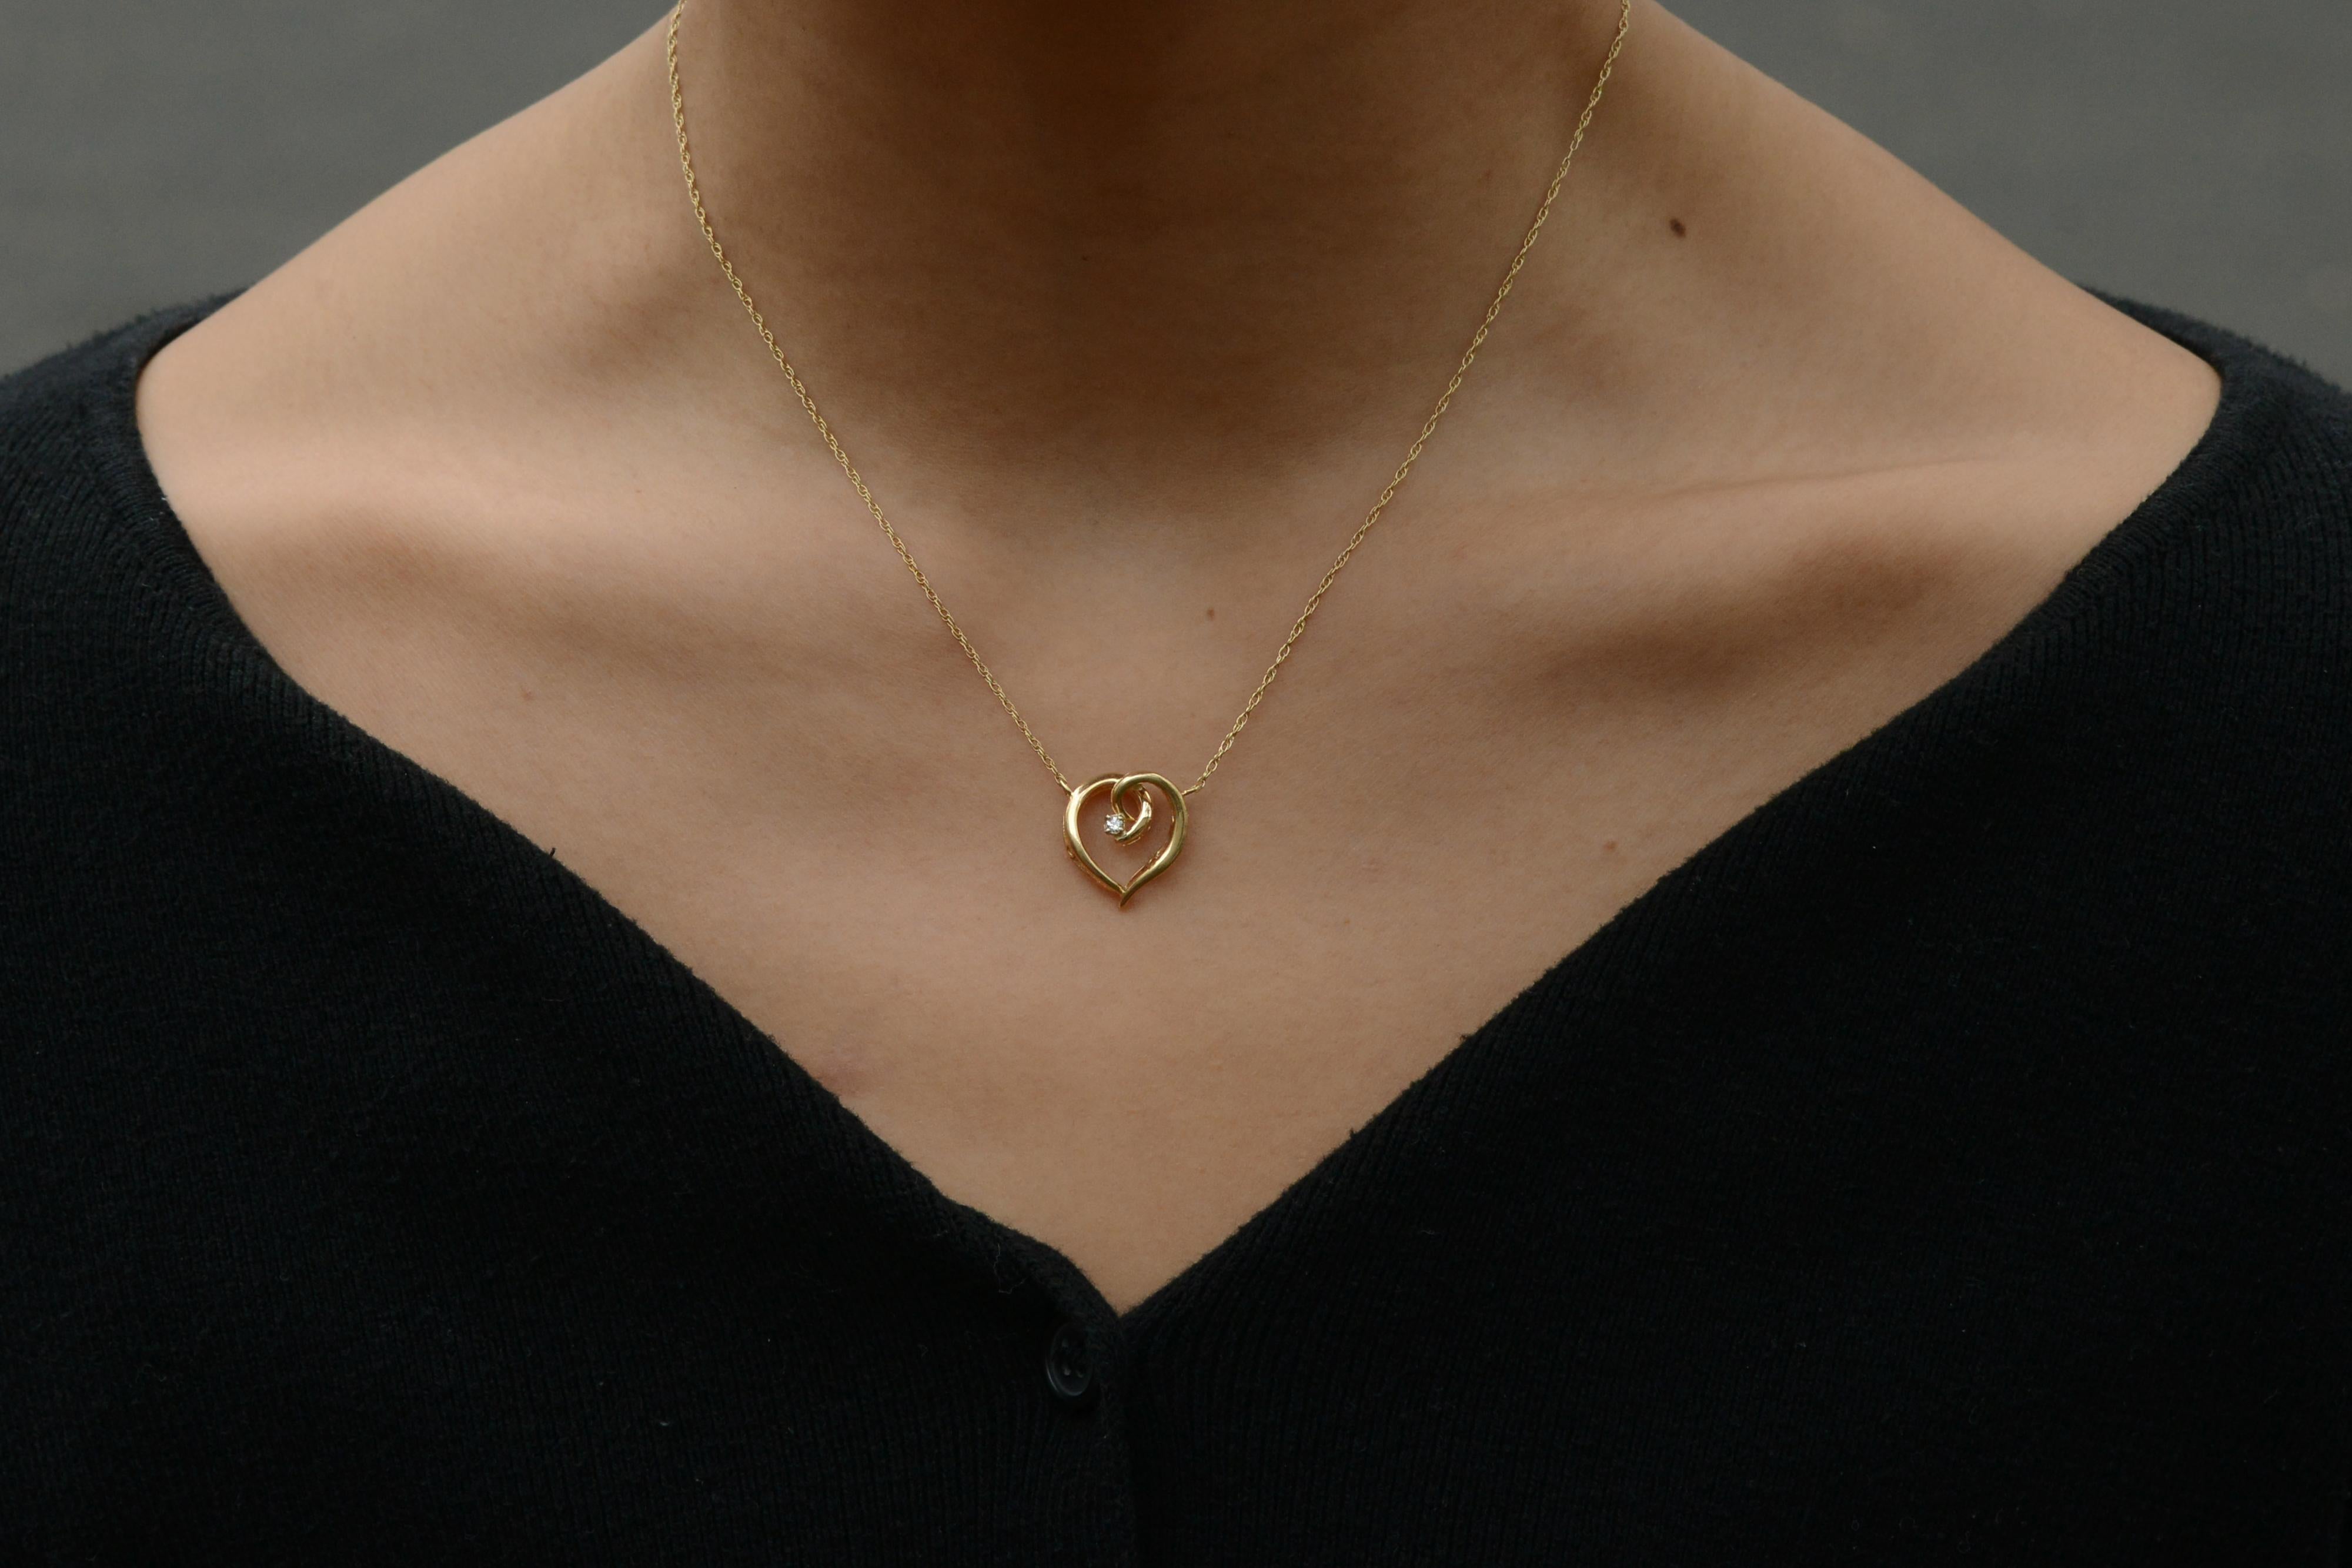 An affordable and sustainable option for the luxury-minded, this necklace is perfect for adding a touch of vintage elegance to any outfit. Featuring a dainty 14k gold link chain supporting an elegant, stylized heart featuring a single, sparkling